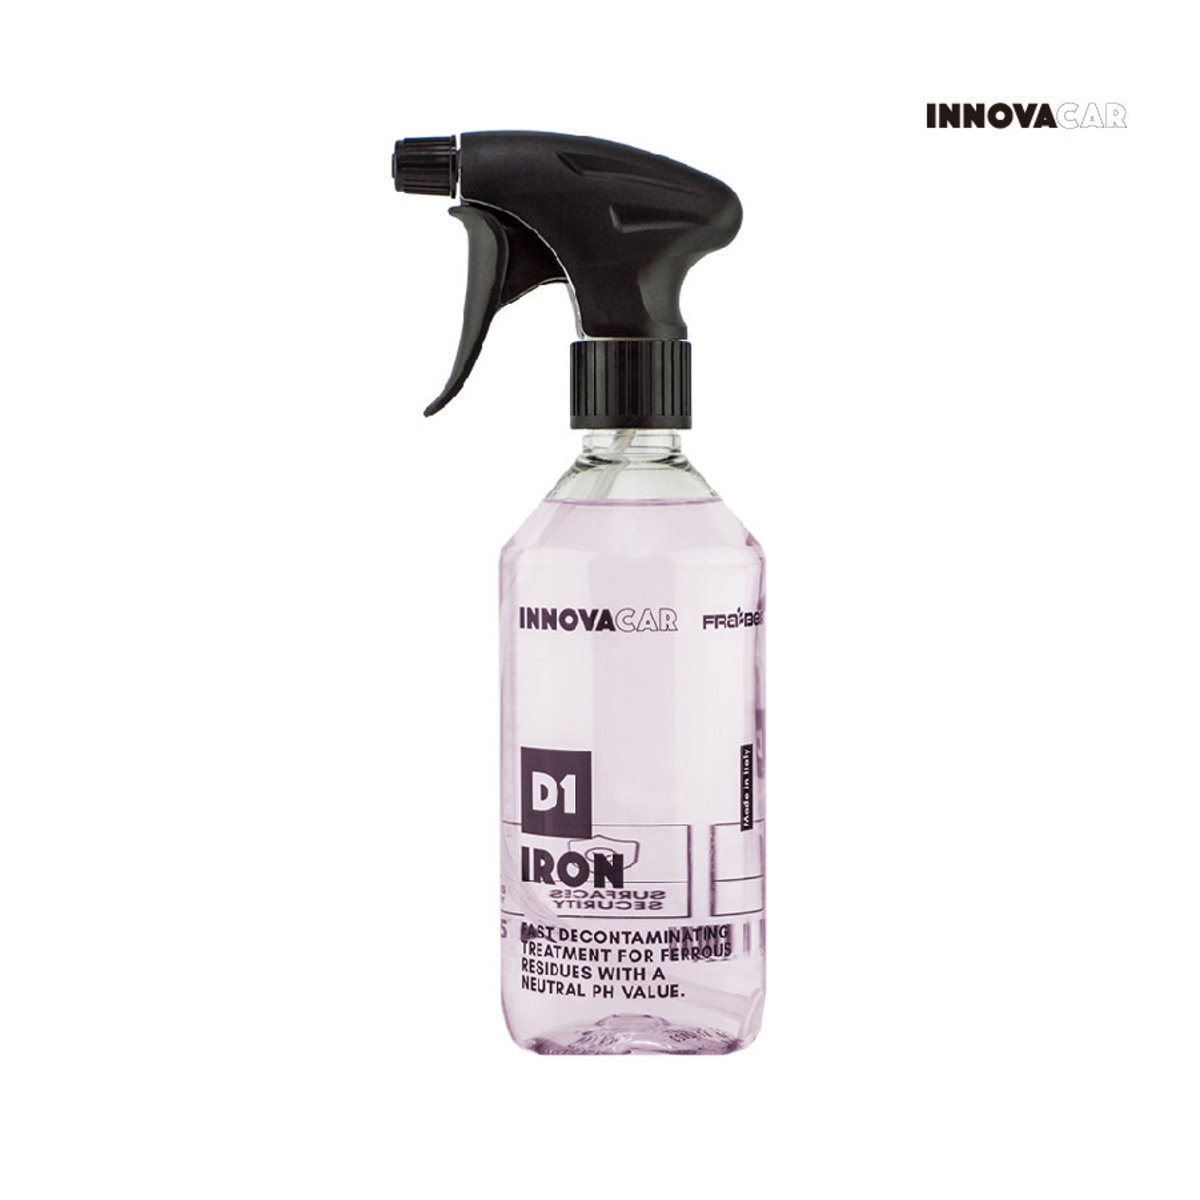 D1 IRON | Wheel Cleaner | Iron Remover